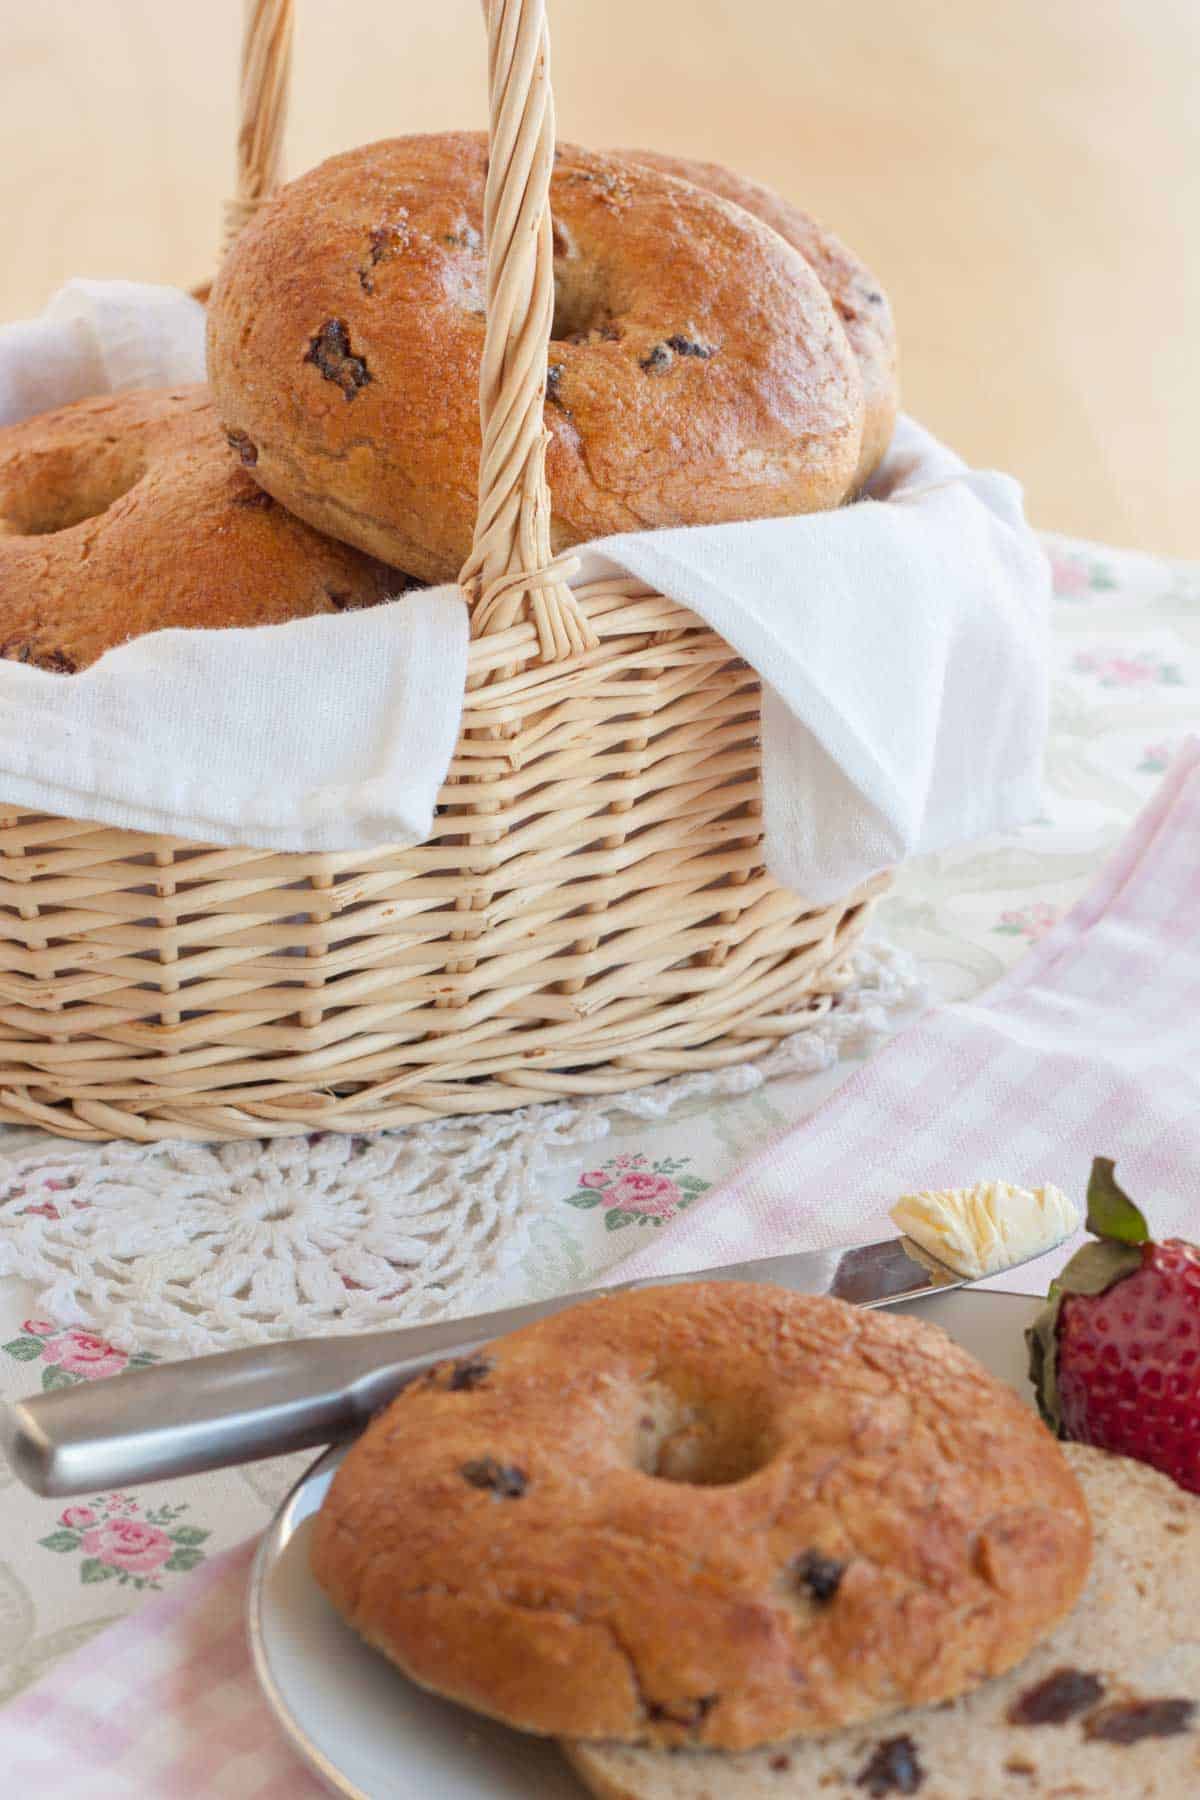 A wicker basket full of cinnamon raisin bagels with a halved bagel and a butter knife in the foreground